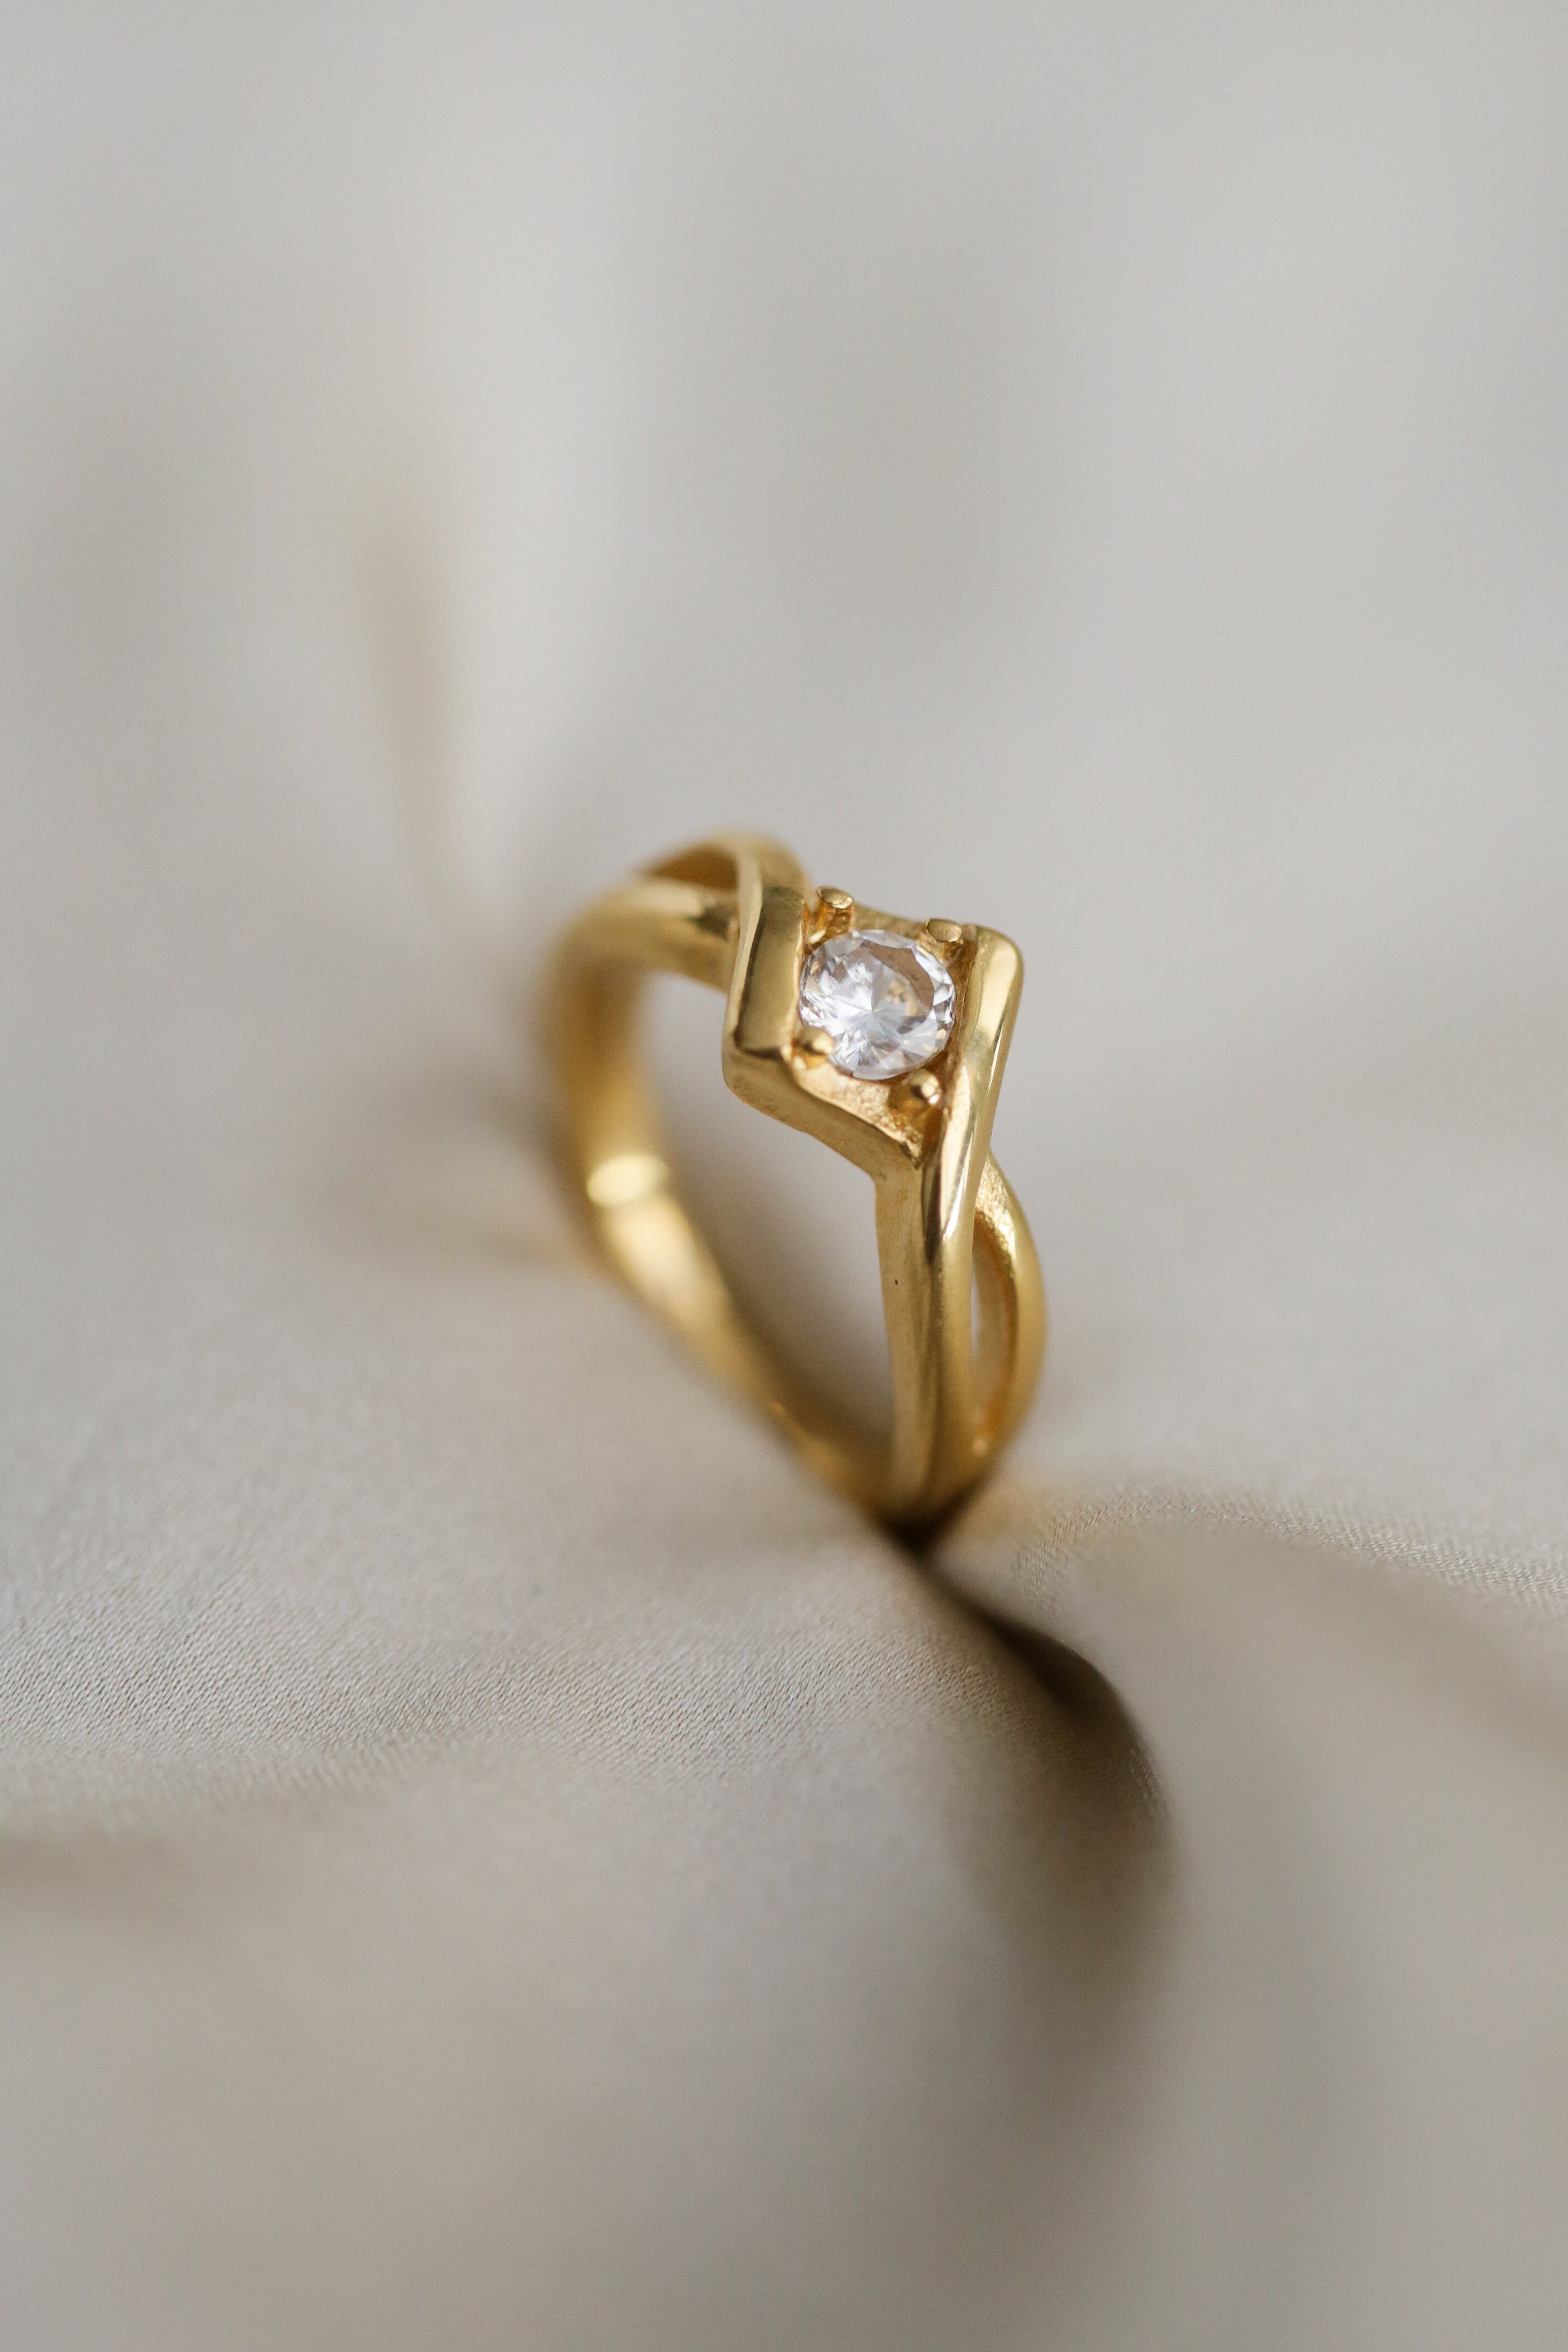 The Heart - Cubic Zirconia Ring - Boutique Minimaliste has waterproof, durable, elegant and vintage inspired jewelry